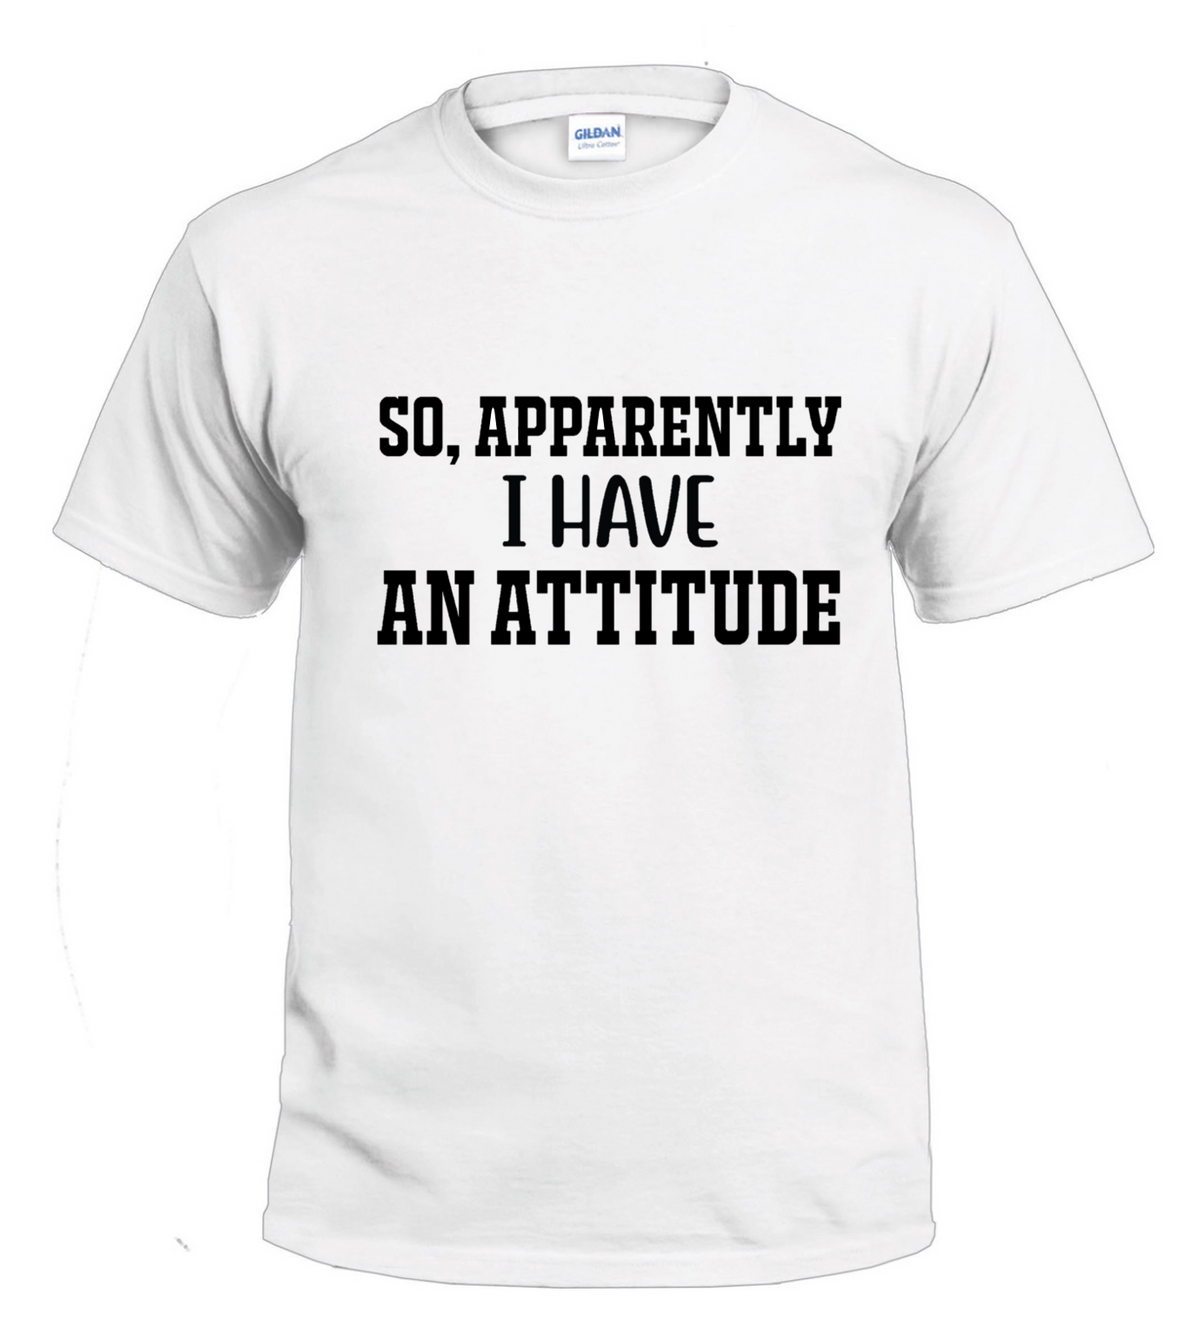 So Apparently I Have an Attitude 2 Sassy t-shirt